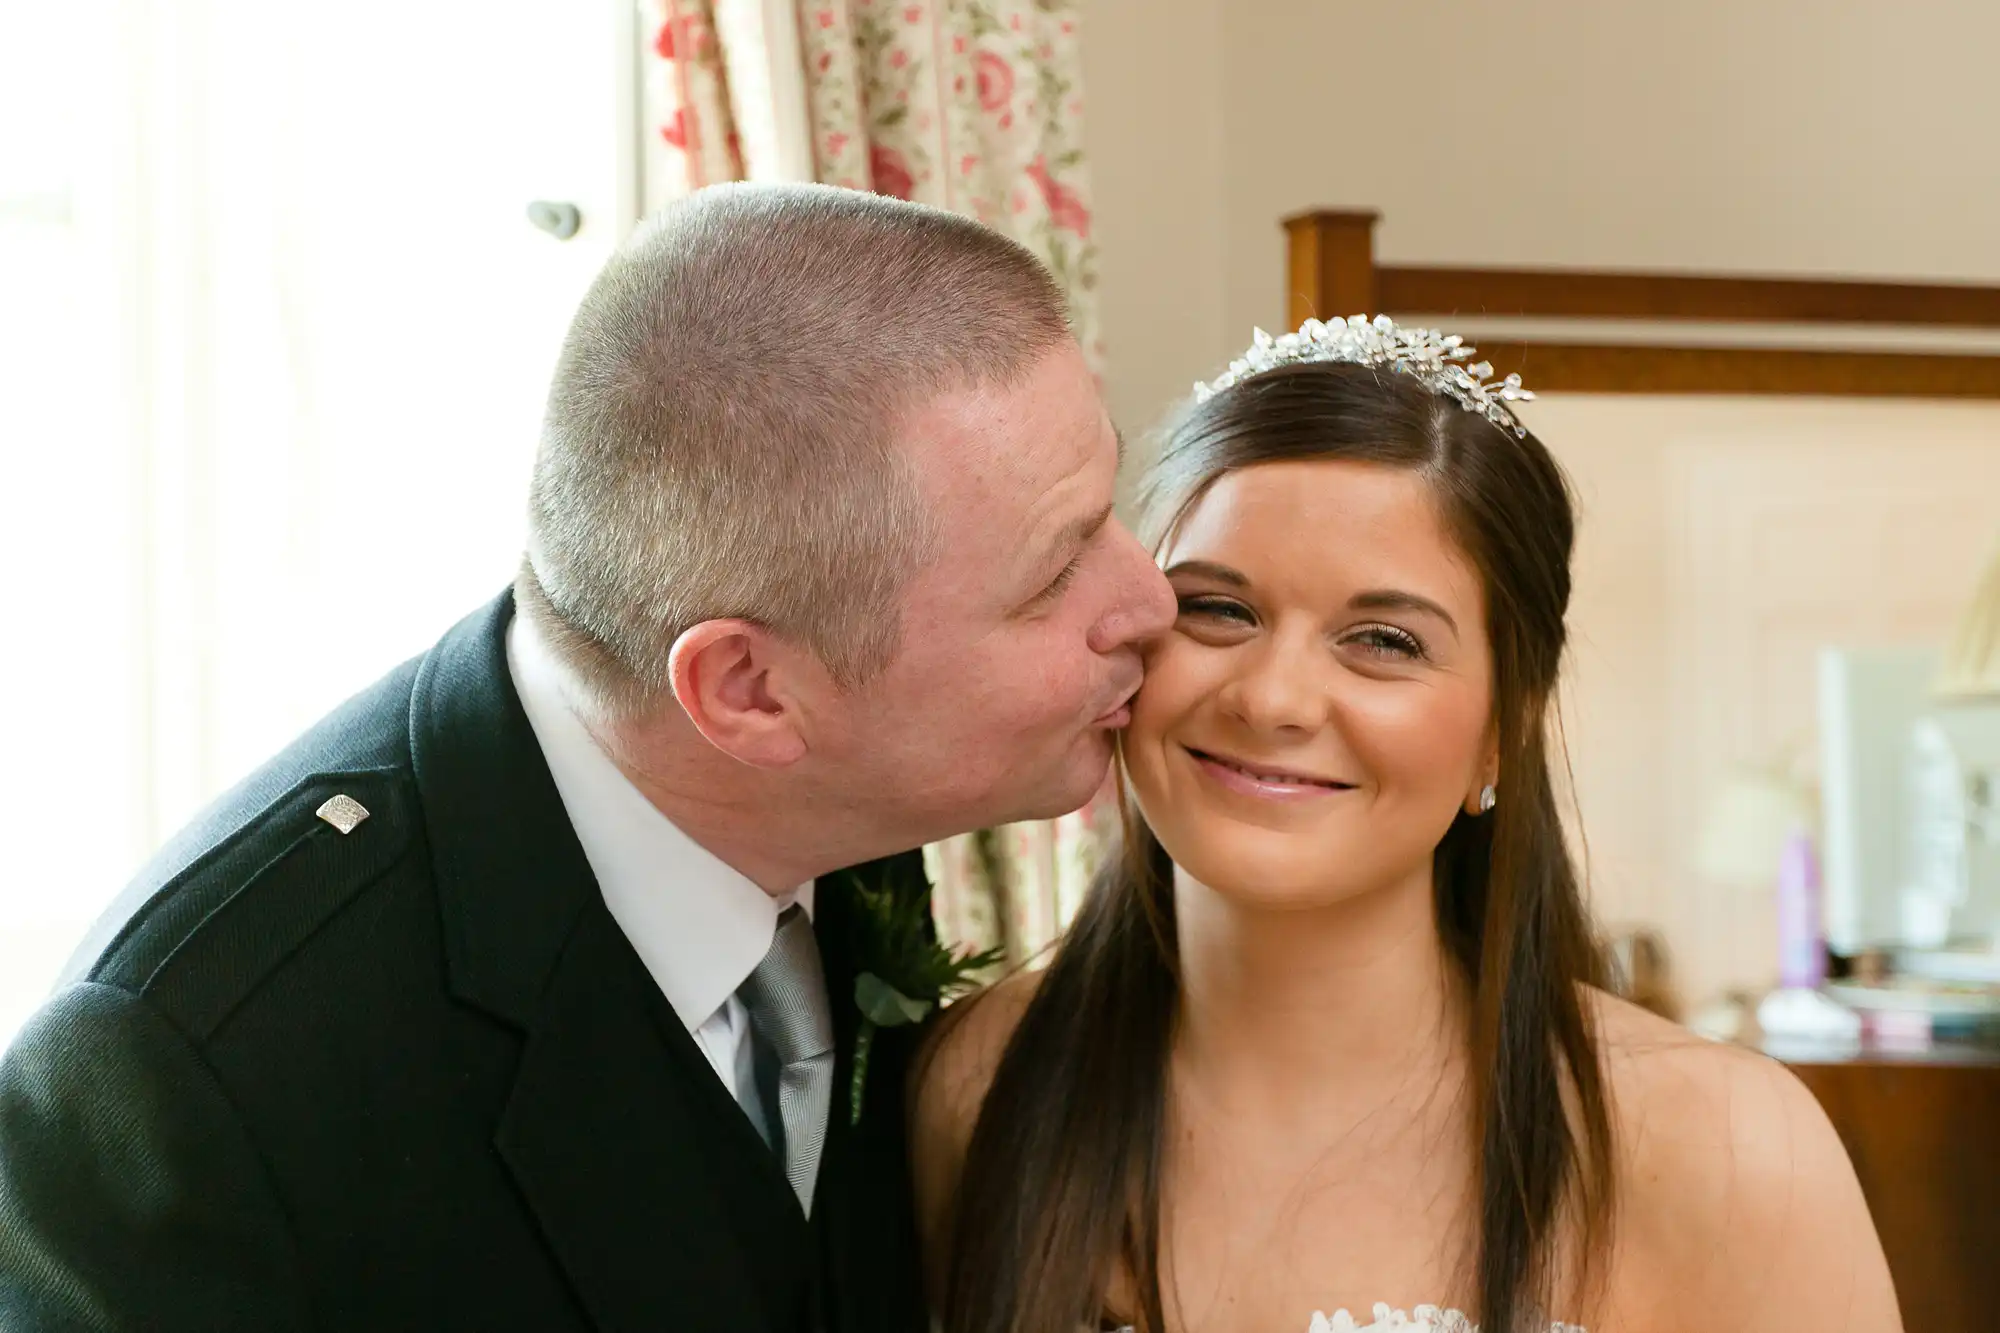 A man in a military uniform kisses a smiling bride on the cheek in a warmly lit room.